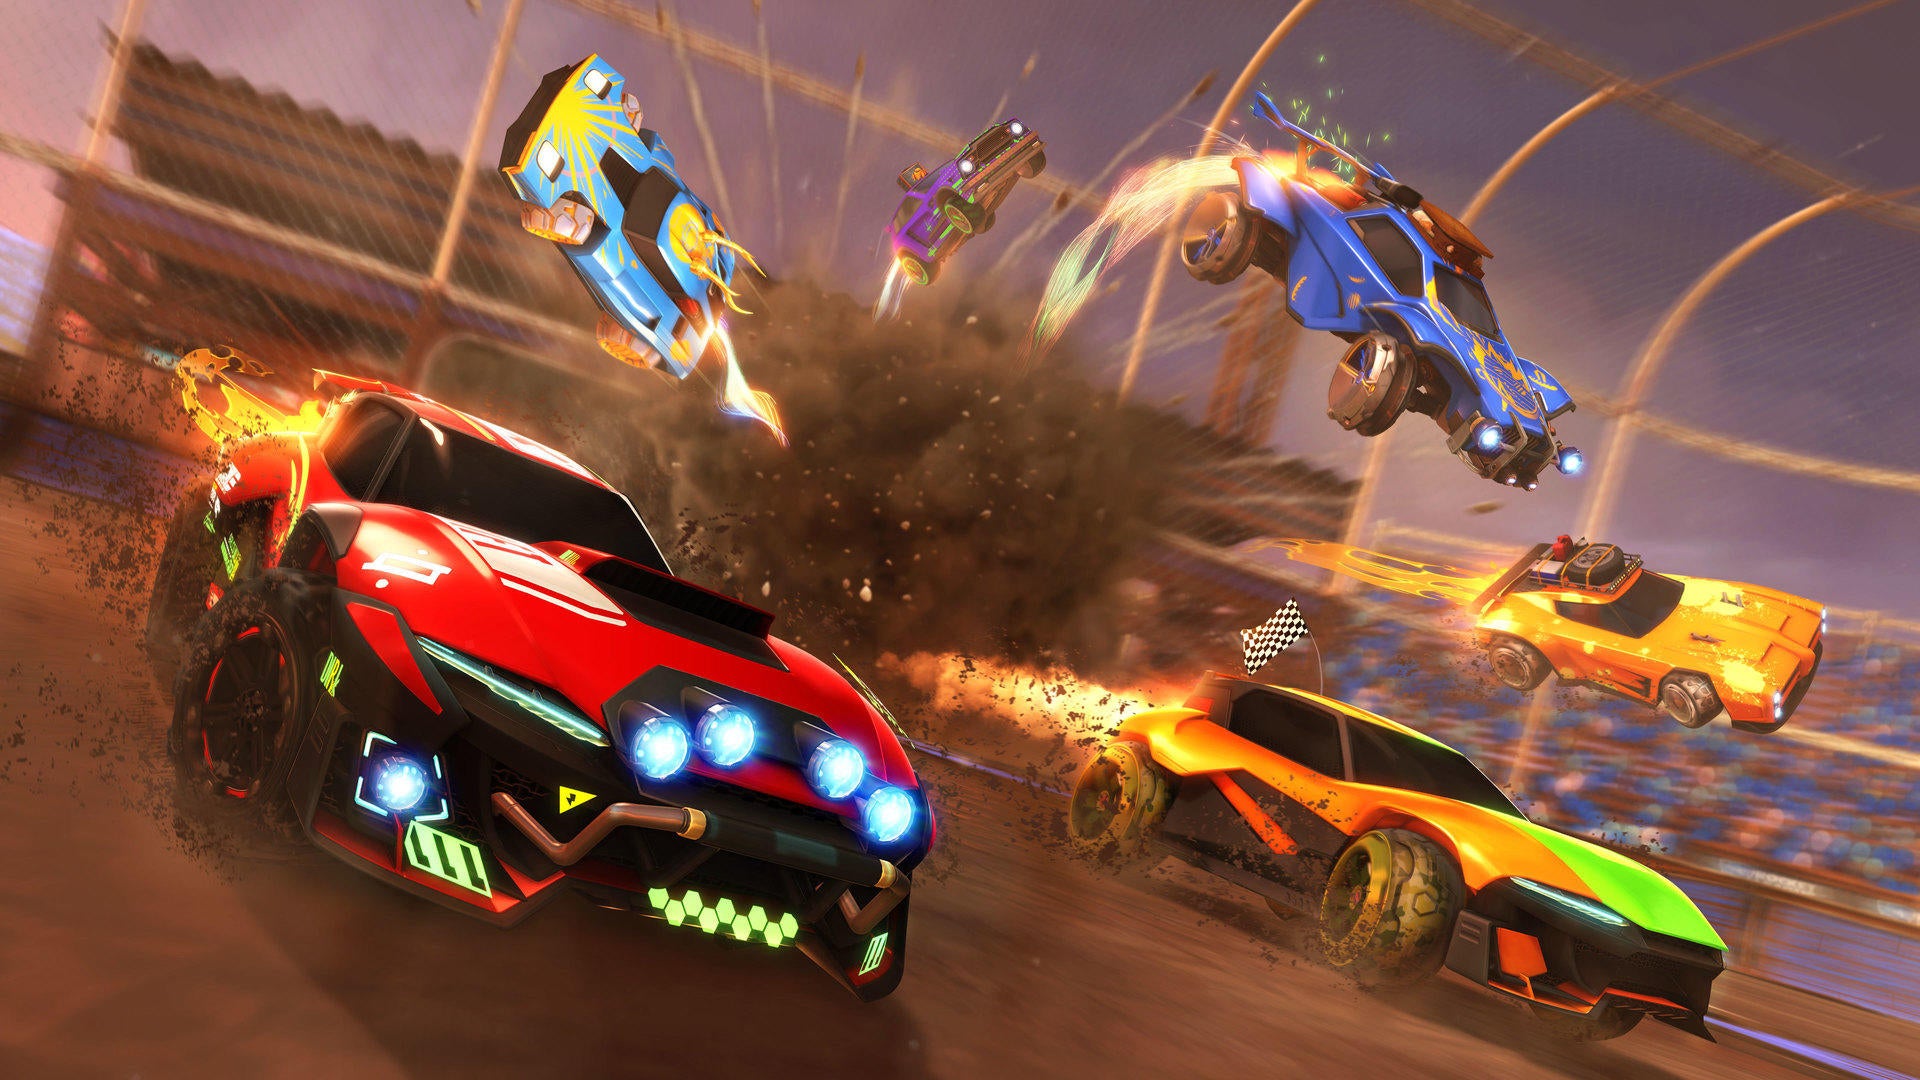 Image for Rocket League's World Championship has been cancelled over coronavirus concerns